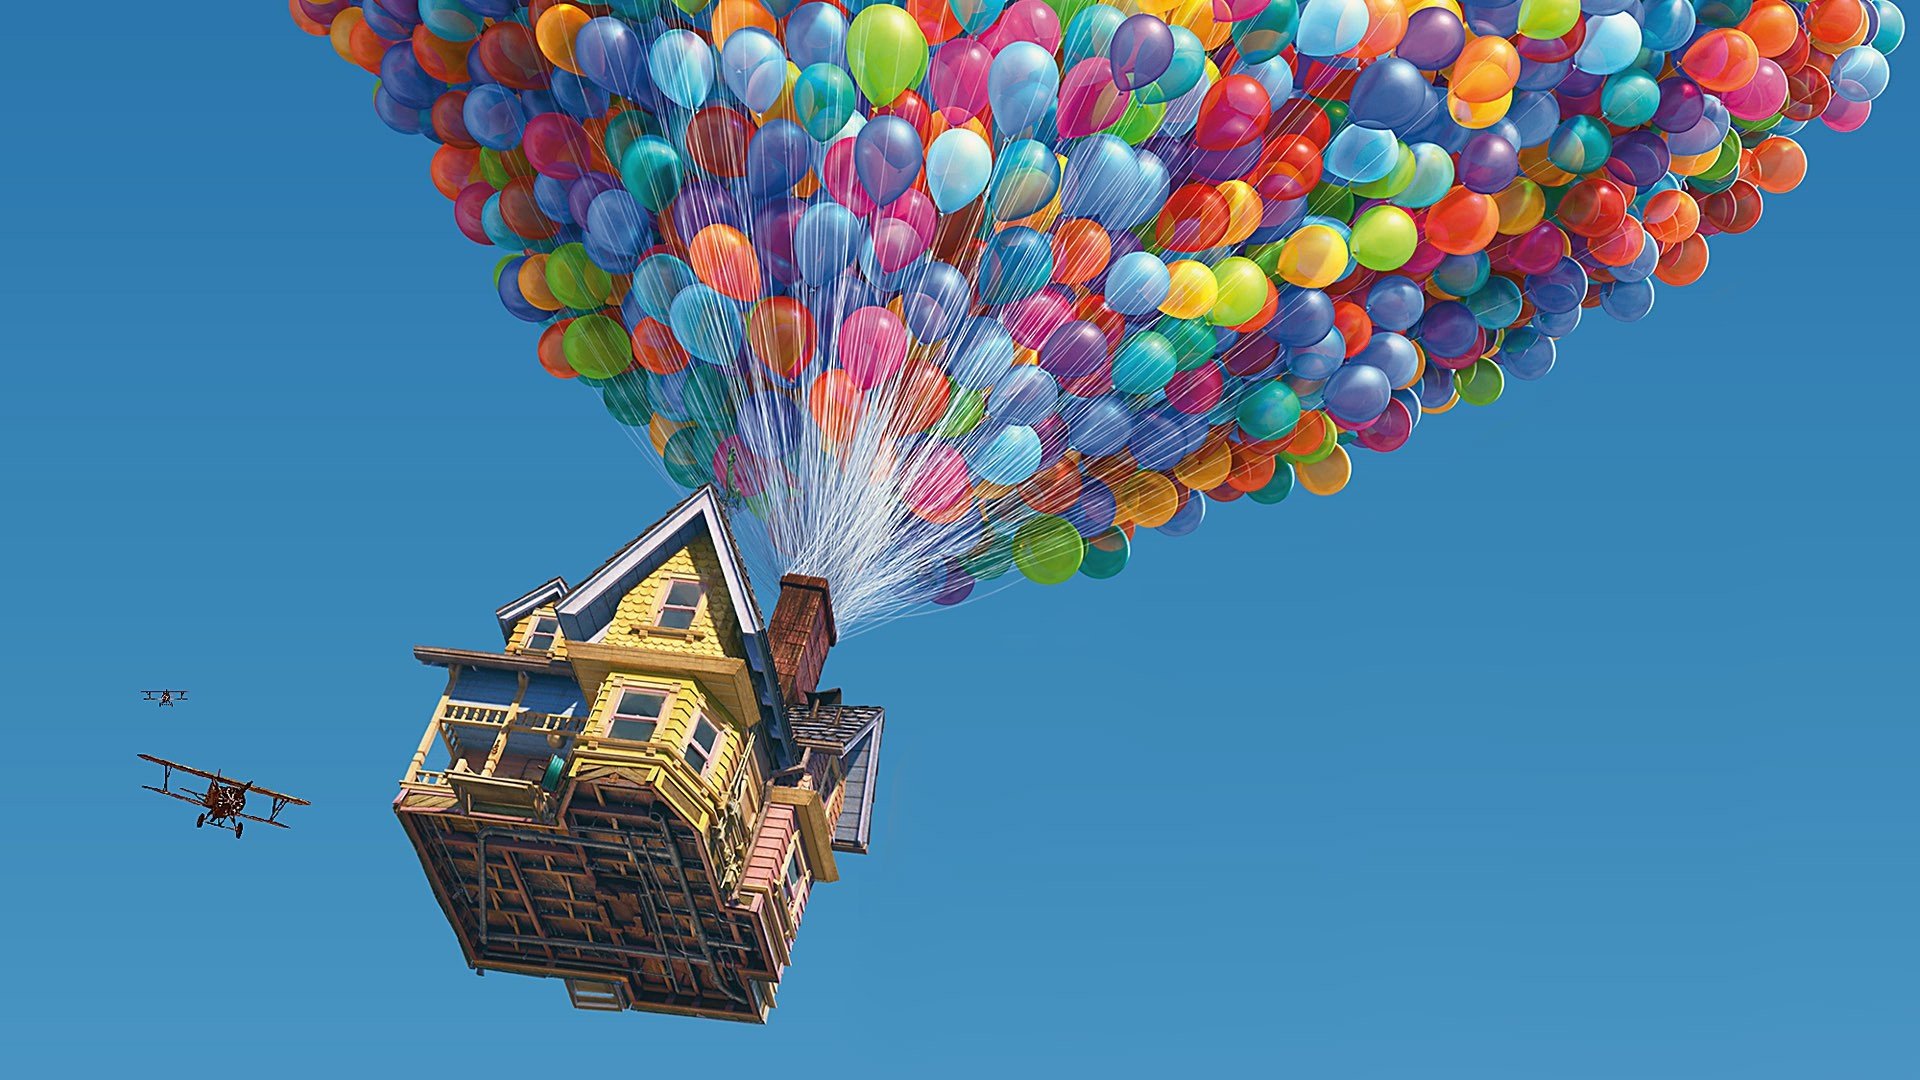 Is It Possible to Let a House Fly Using Hundreds of Helium Balloons?